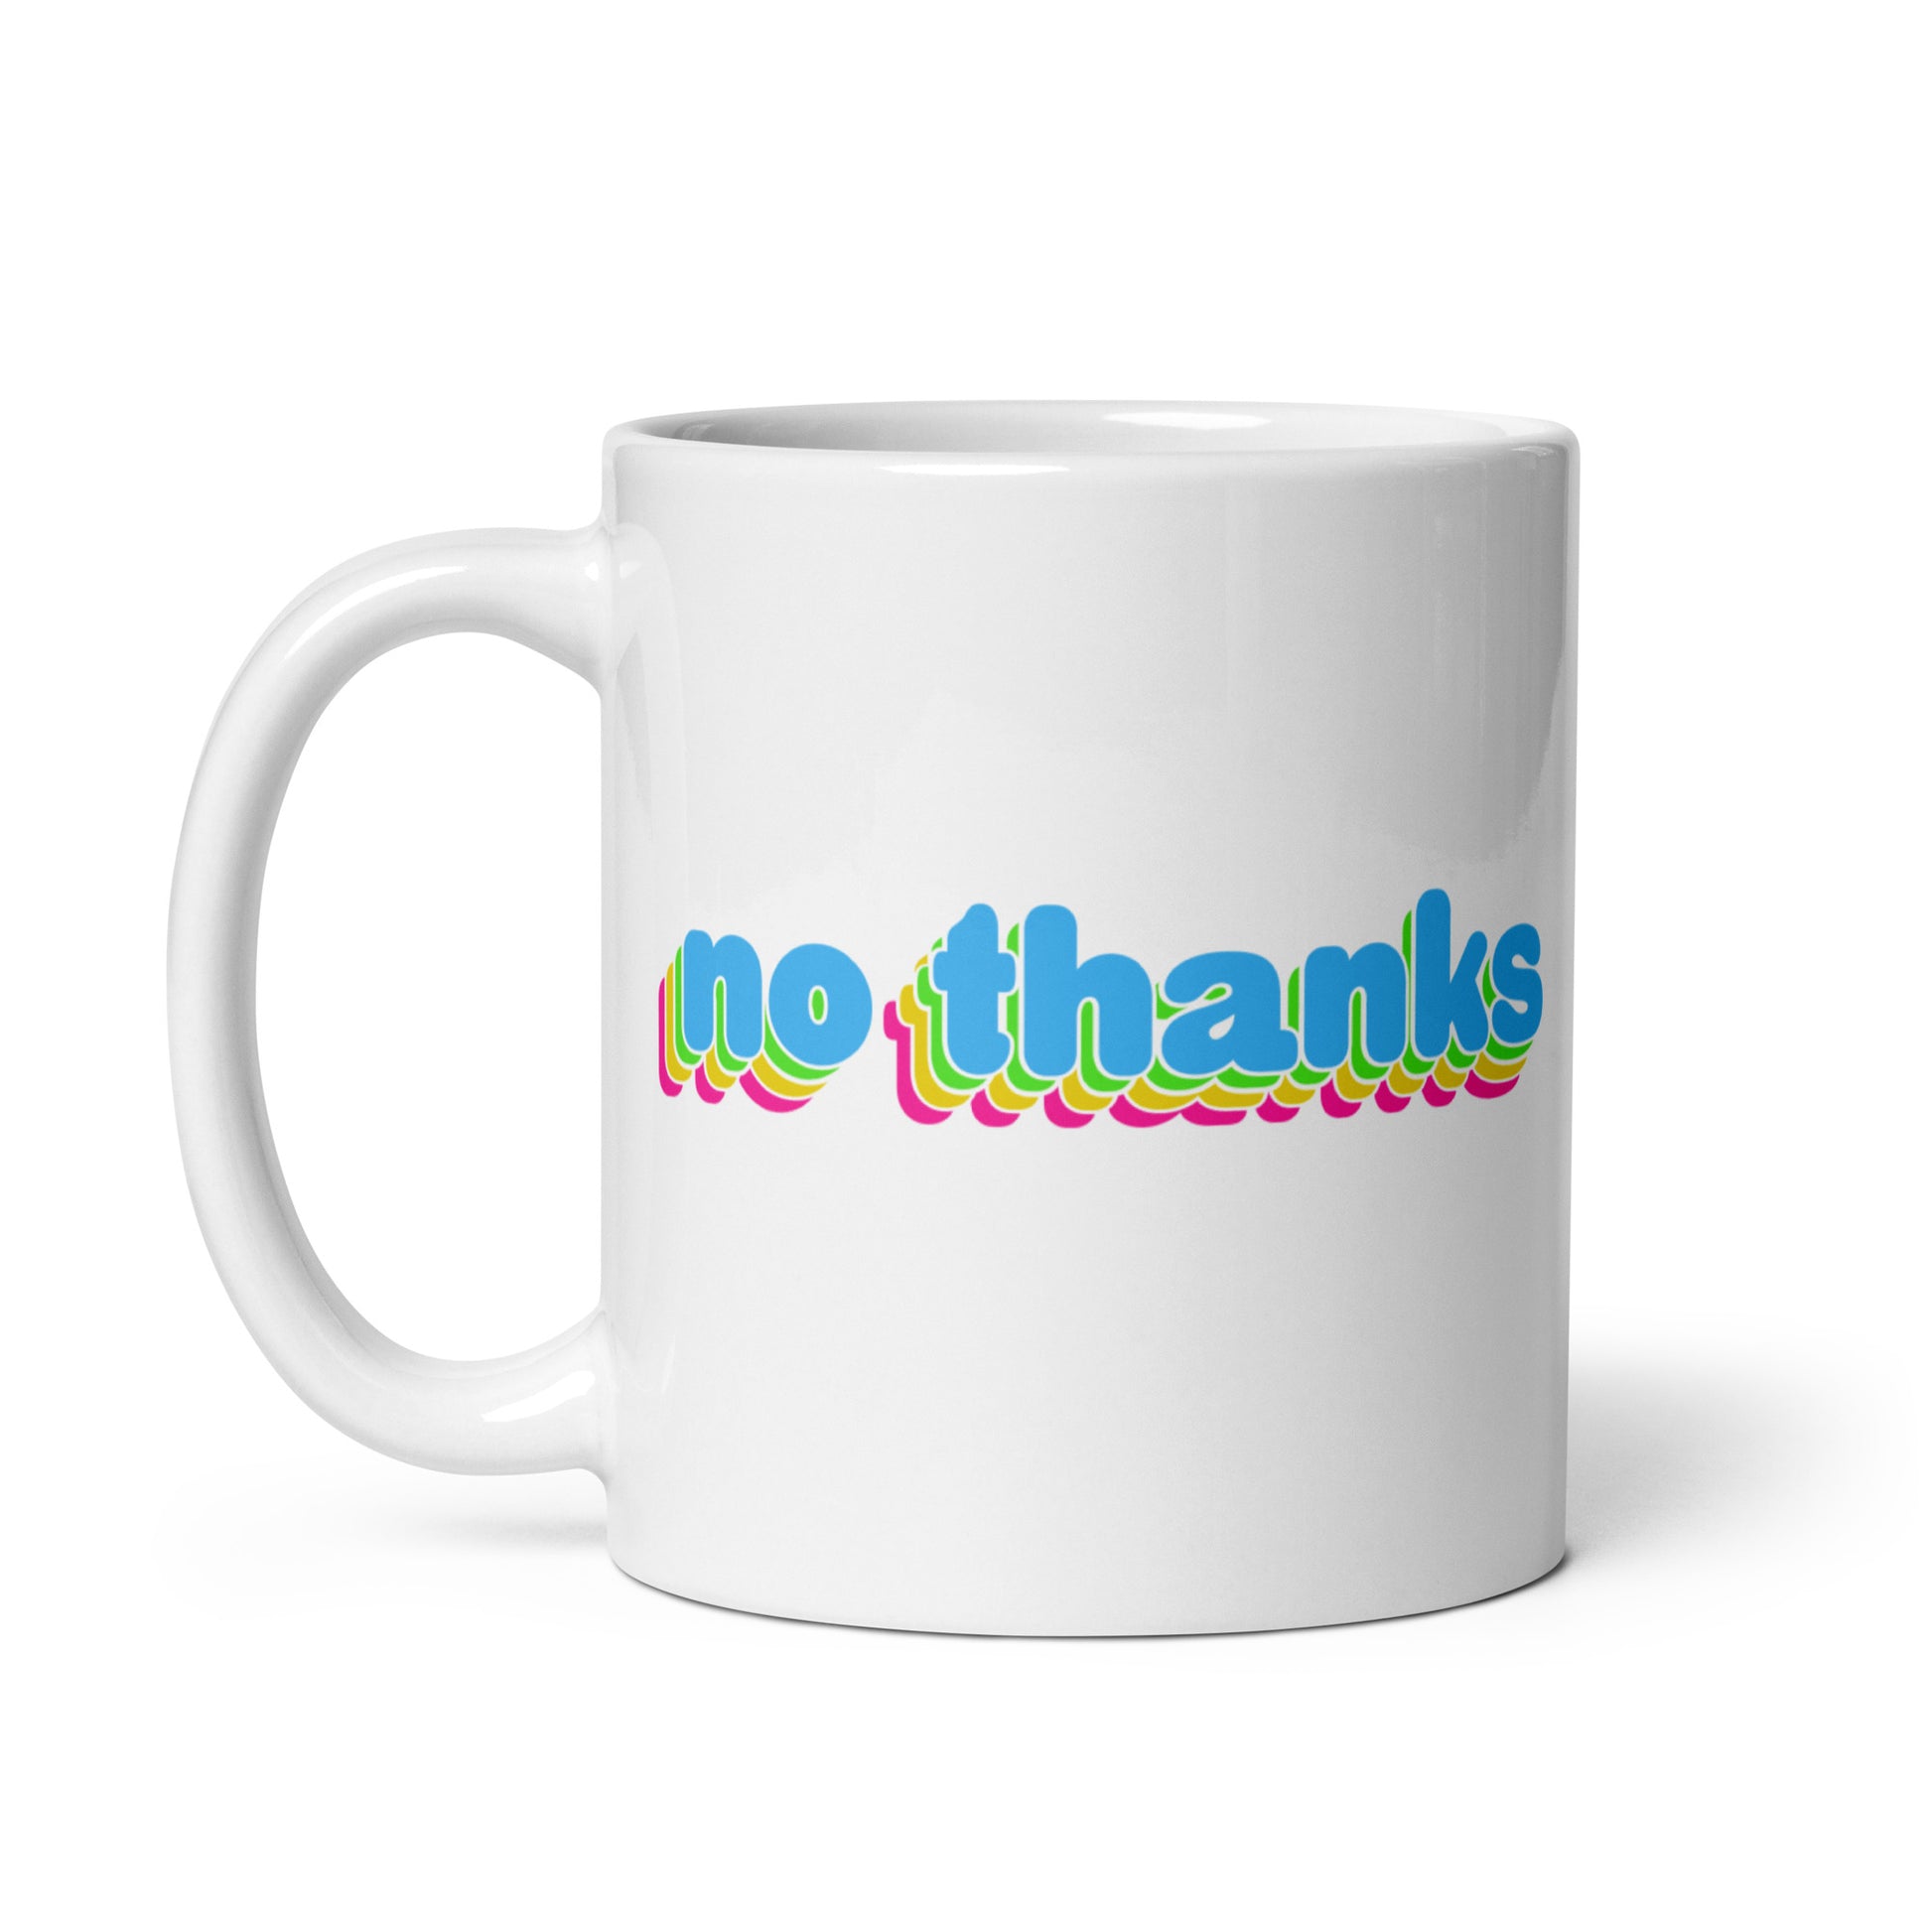 A white 11 oz ceramic mug with the handle to the left featuring colorful bubble text reading "no thanks"